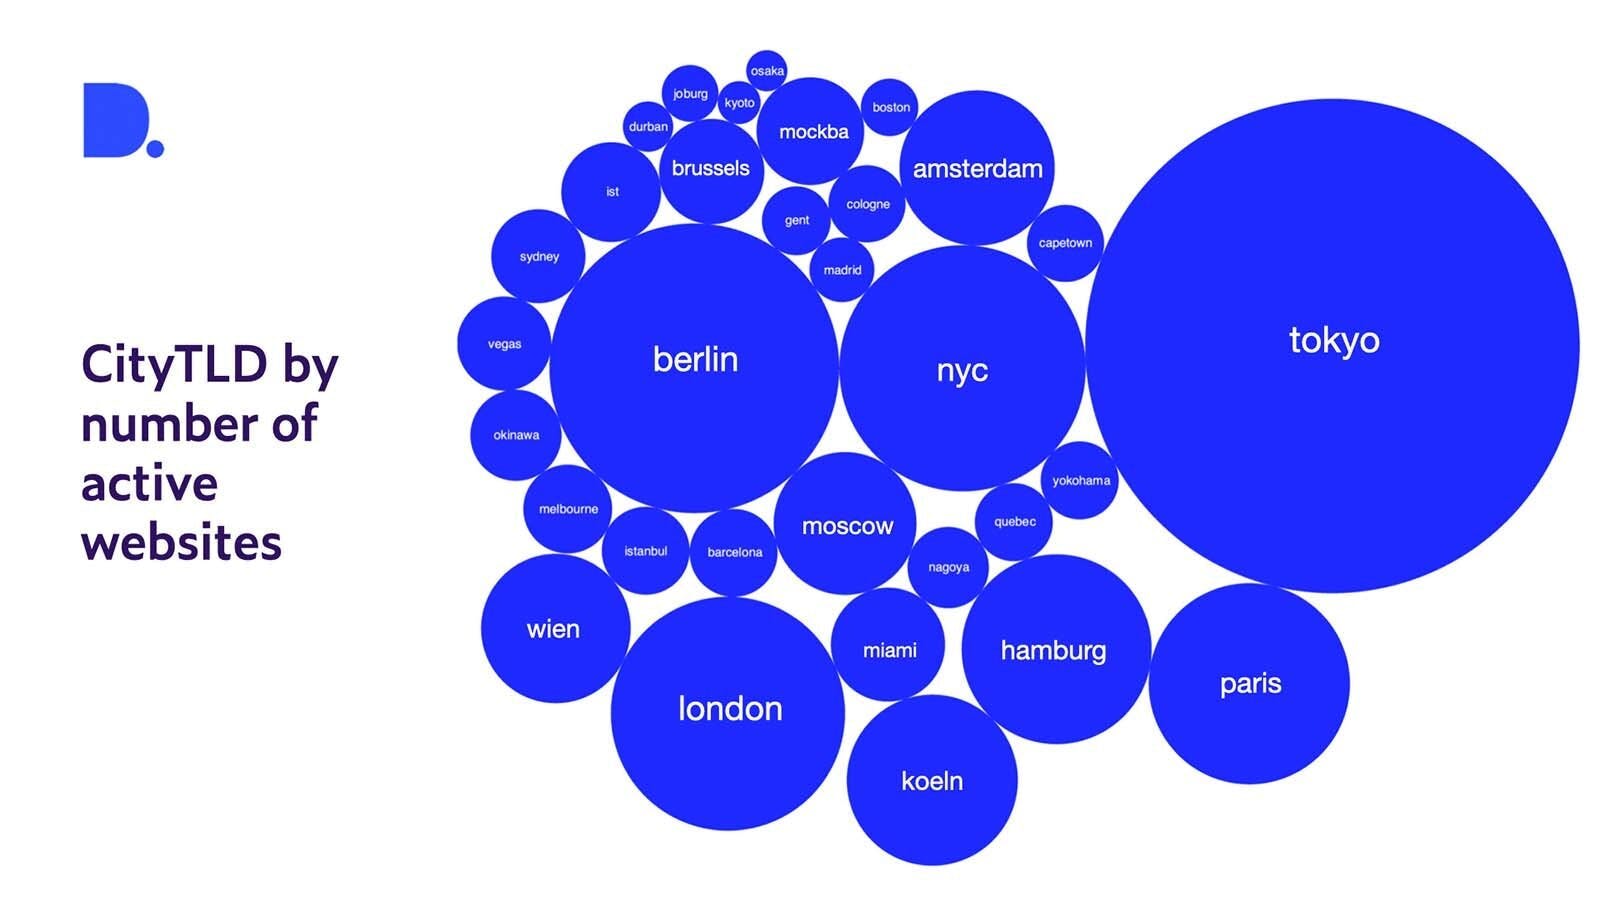 Size of the circles reflects the relative size of the number of active websites for each cityTLD.